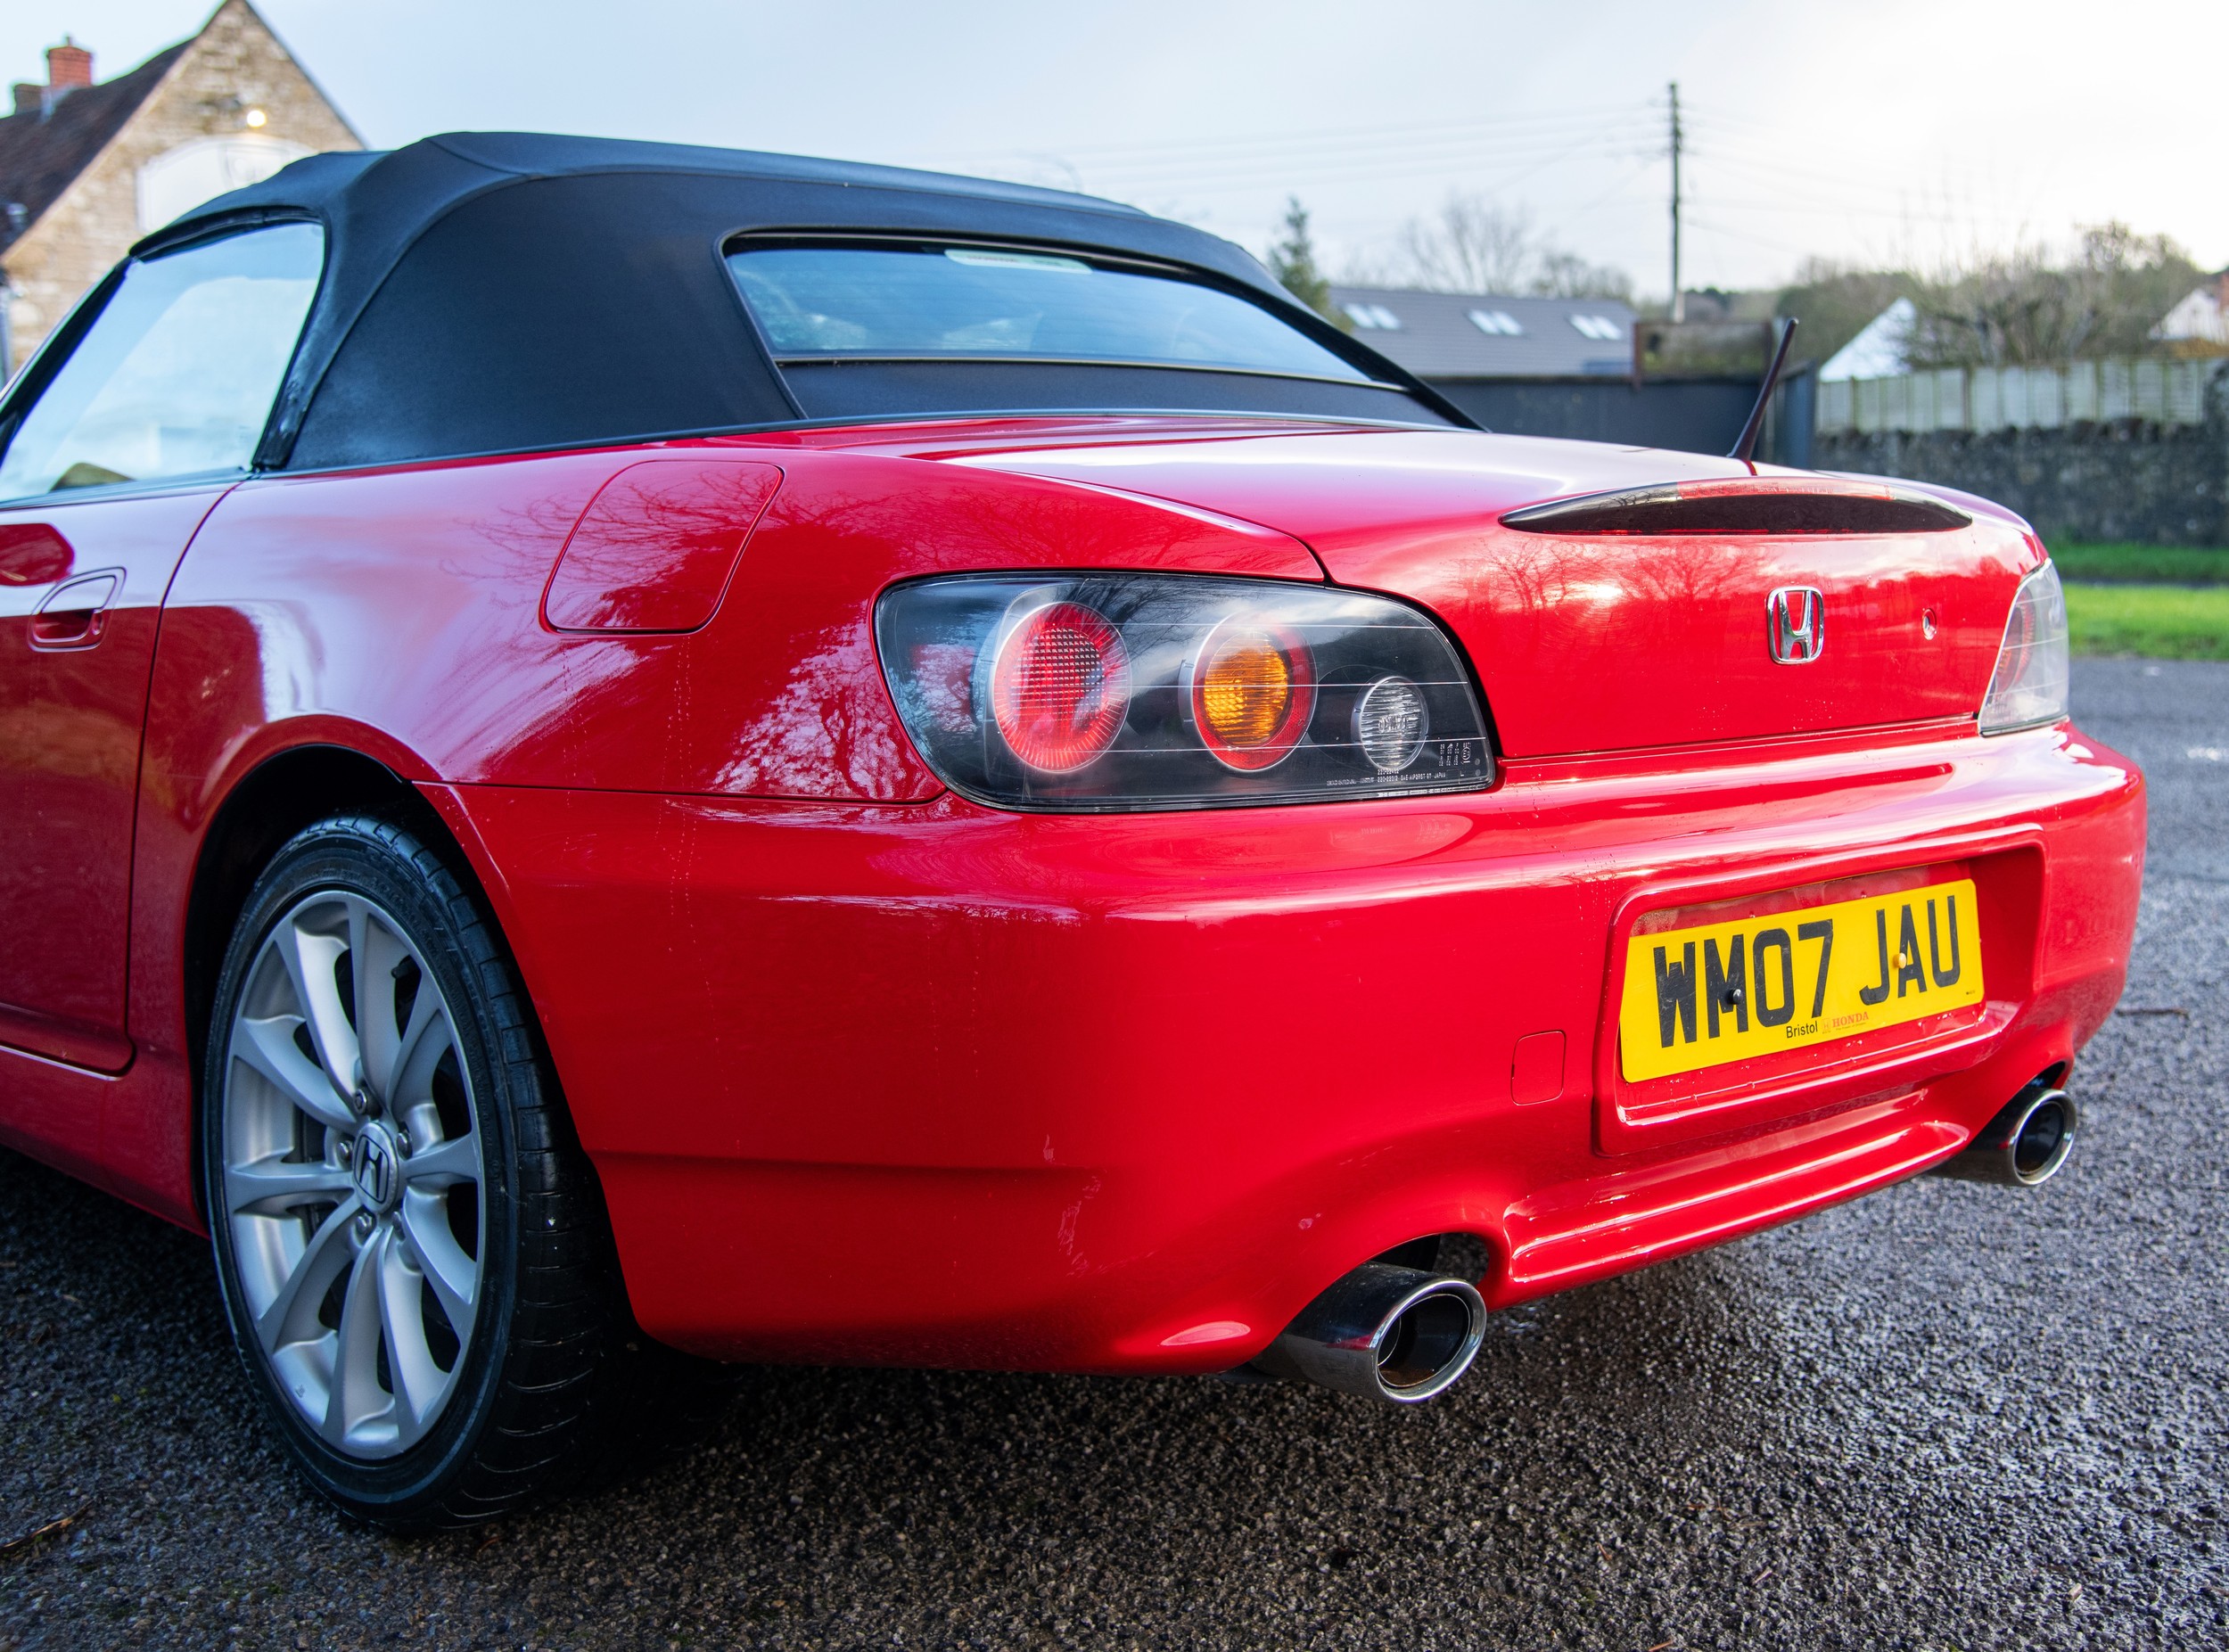 2007 HONDA S2000 Registration Number: WM07 JAU Chassis Number: JHMAP11207S200009 Recorded Mileage: - Image 6 of 26